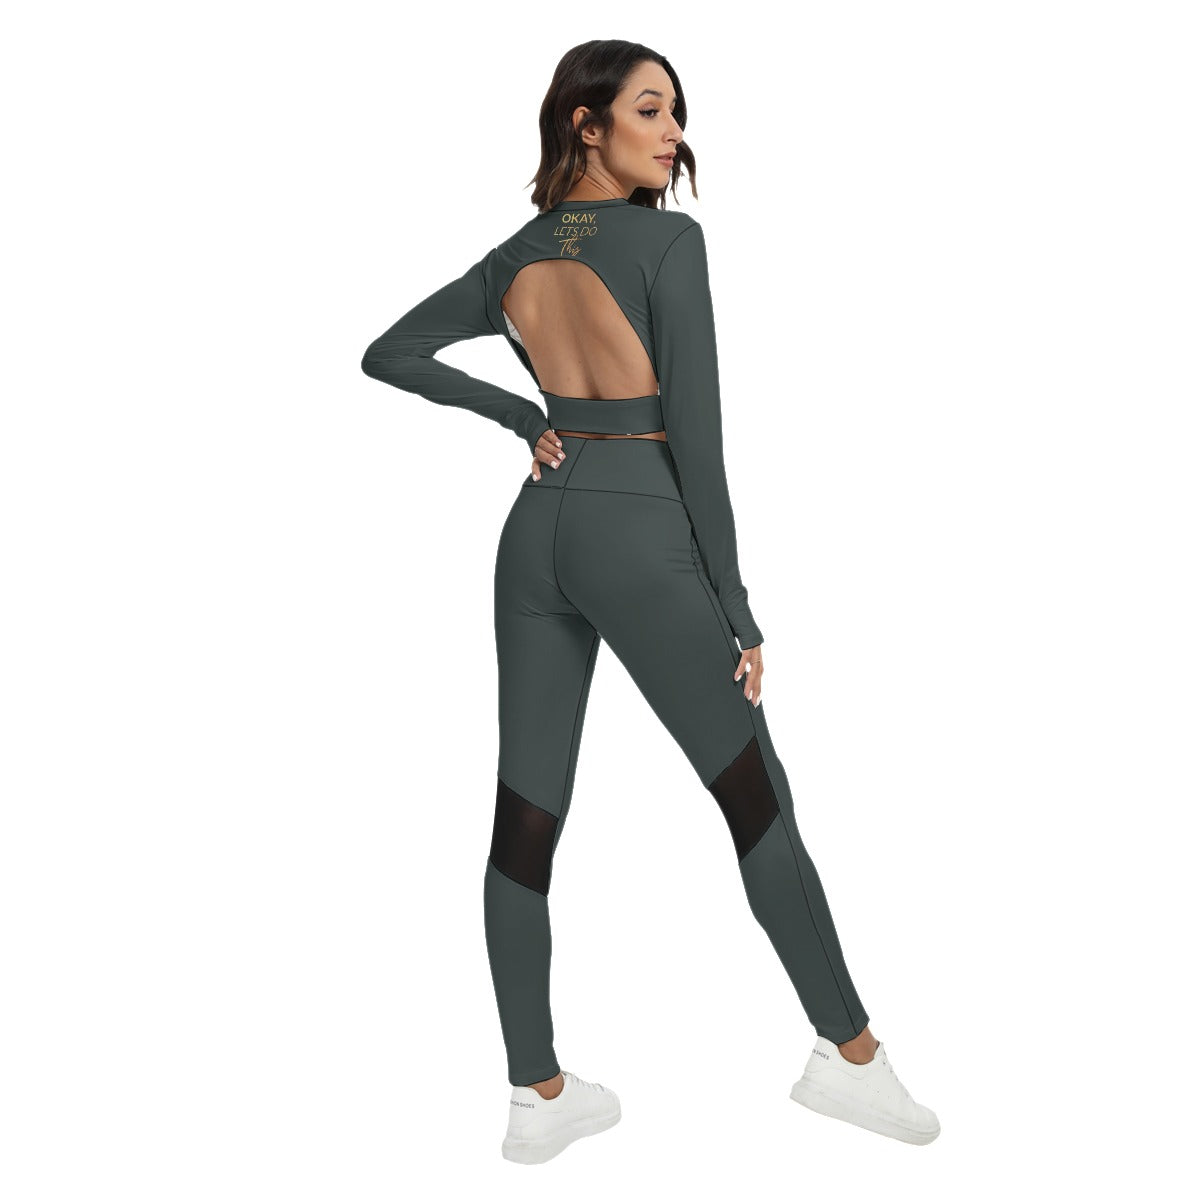 All-Over Print Women's Sport Set With Backless Top And Leggings